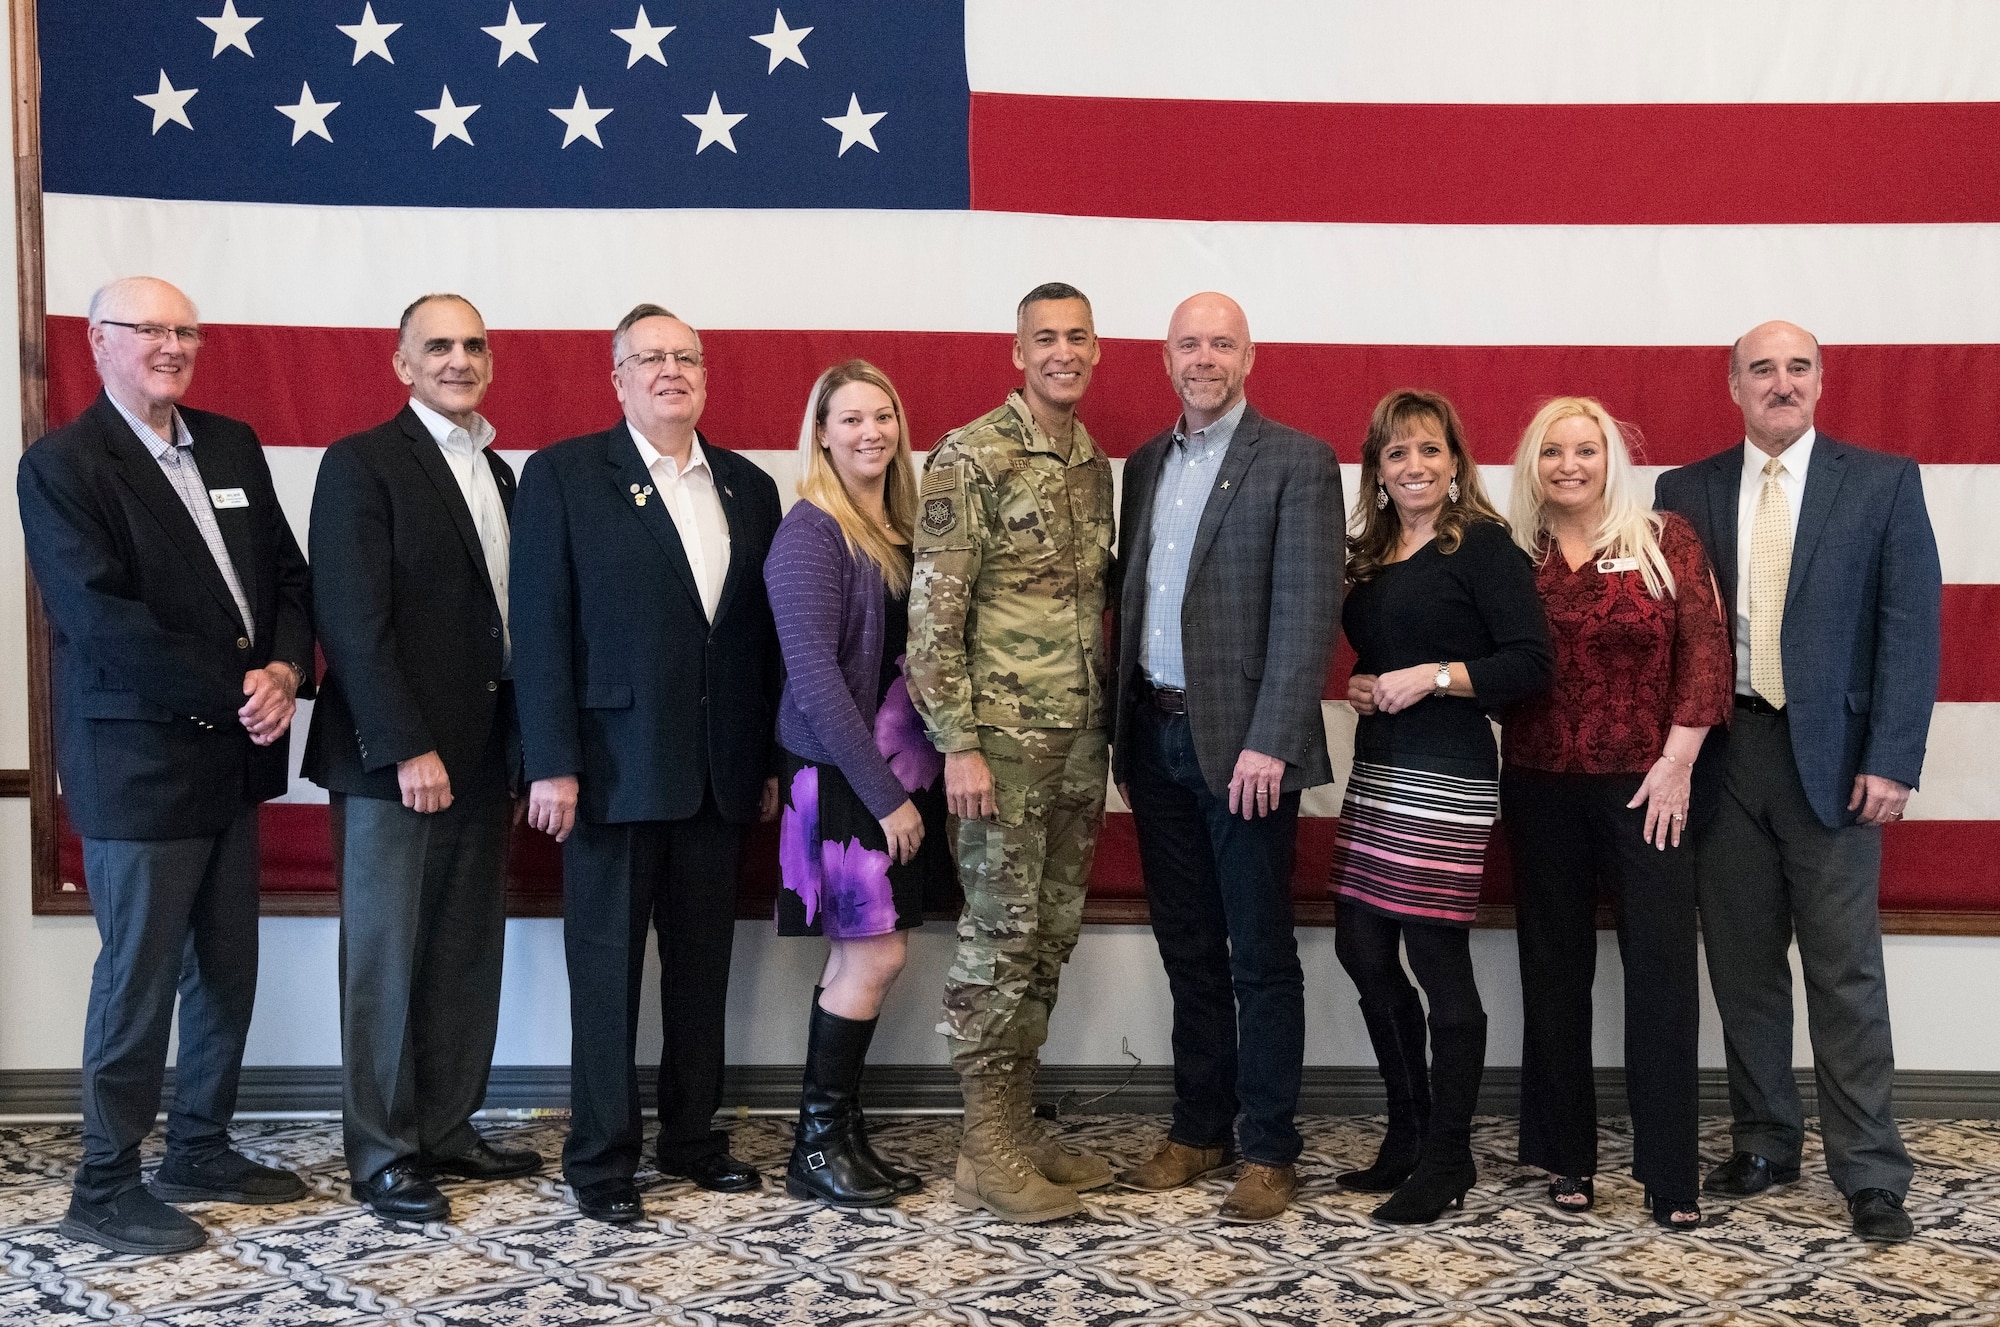 U.S. Air Force Chief Master Sgt. Terrence Greene, command chief of Air Mobility Command, Scott Air Force Base, Ill., and AMC civic leaders pose for a photo Feb. 7, 2019, at The Landings Club on Dover Air Force Base, Del. Greene thanked the civic leaders on their continued involvement and support of the base, personnel and family members. (U.S. Air Force photo by Roland Balik)